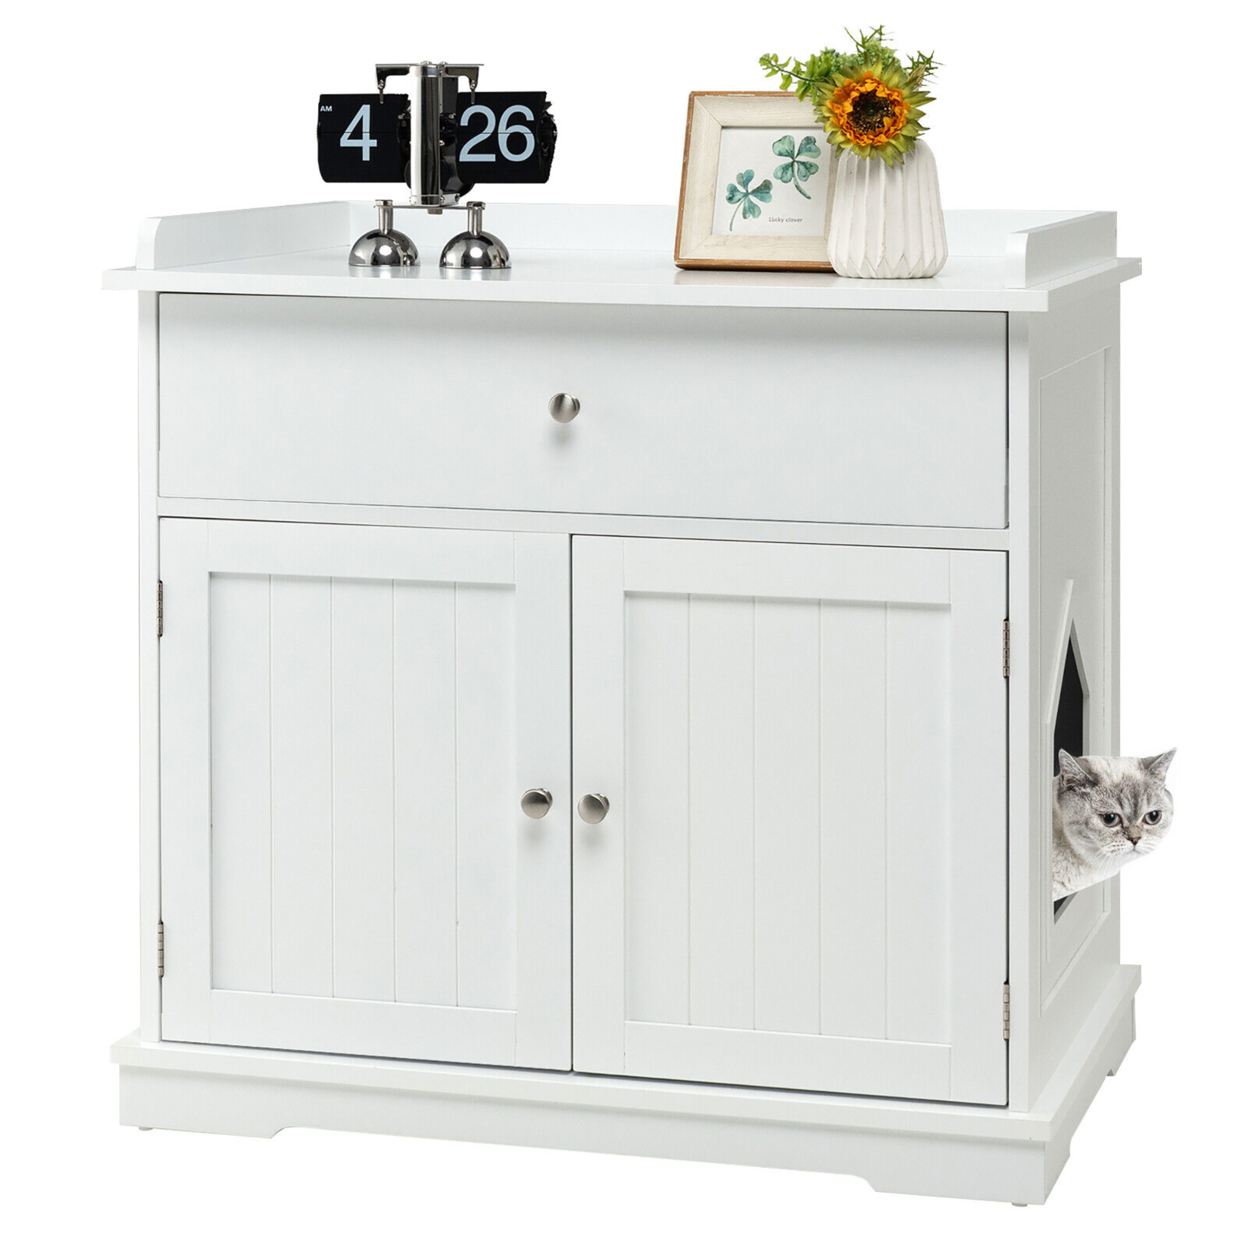 Wooden Cat Litter Box Enclosure W/ Drawer Side Table Furniture - White